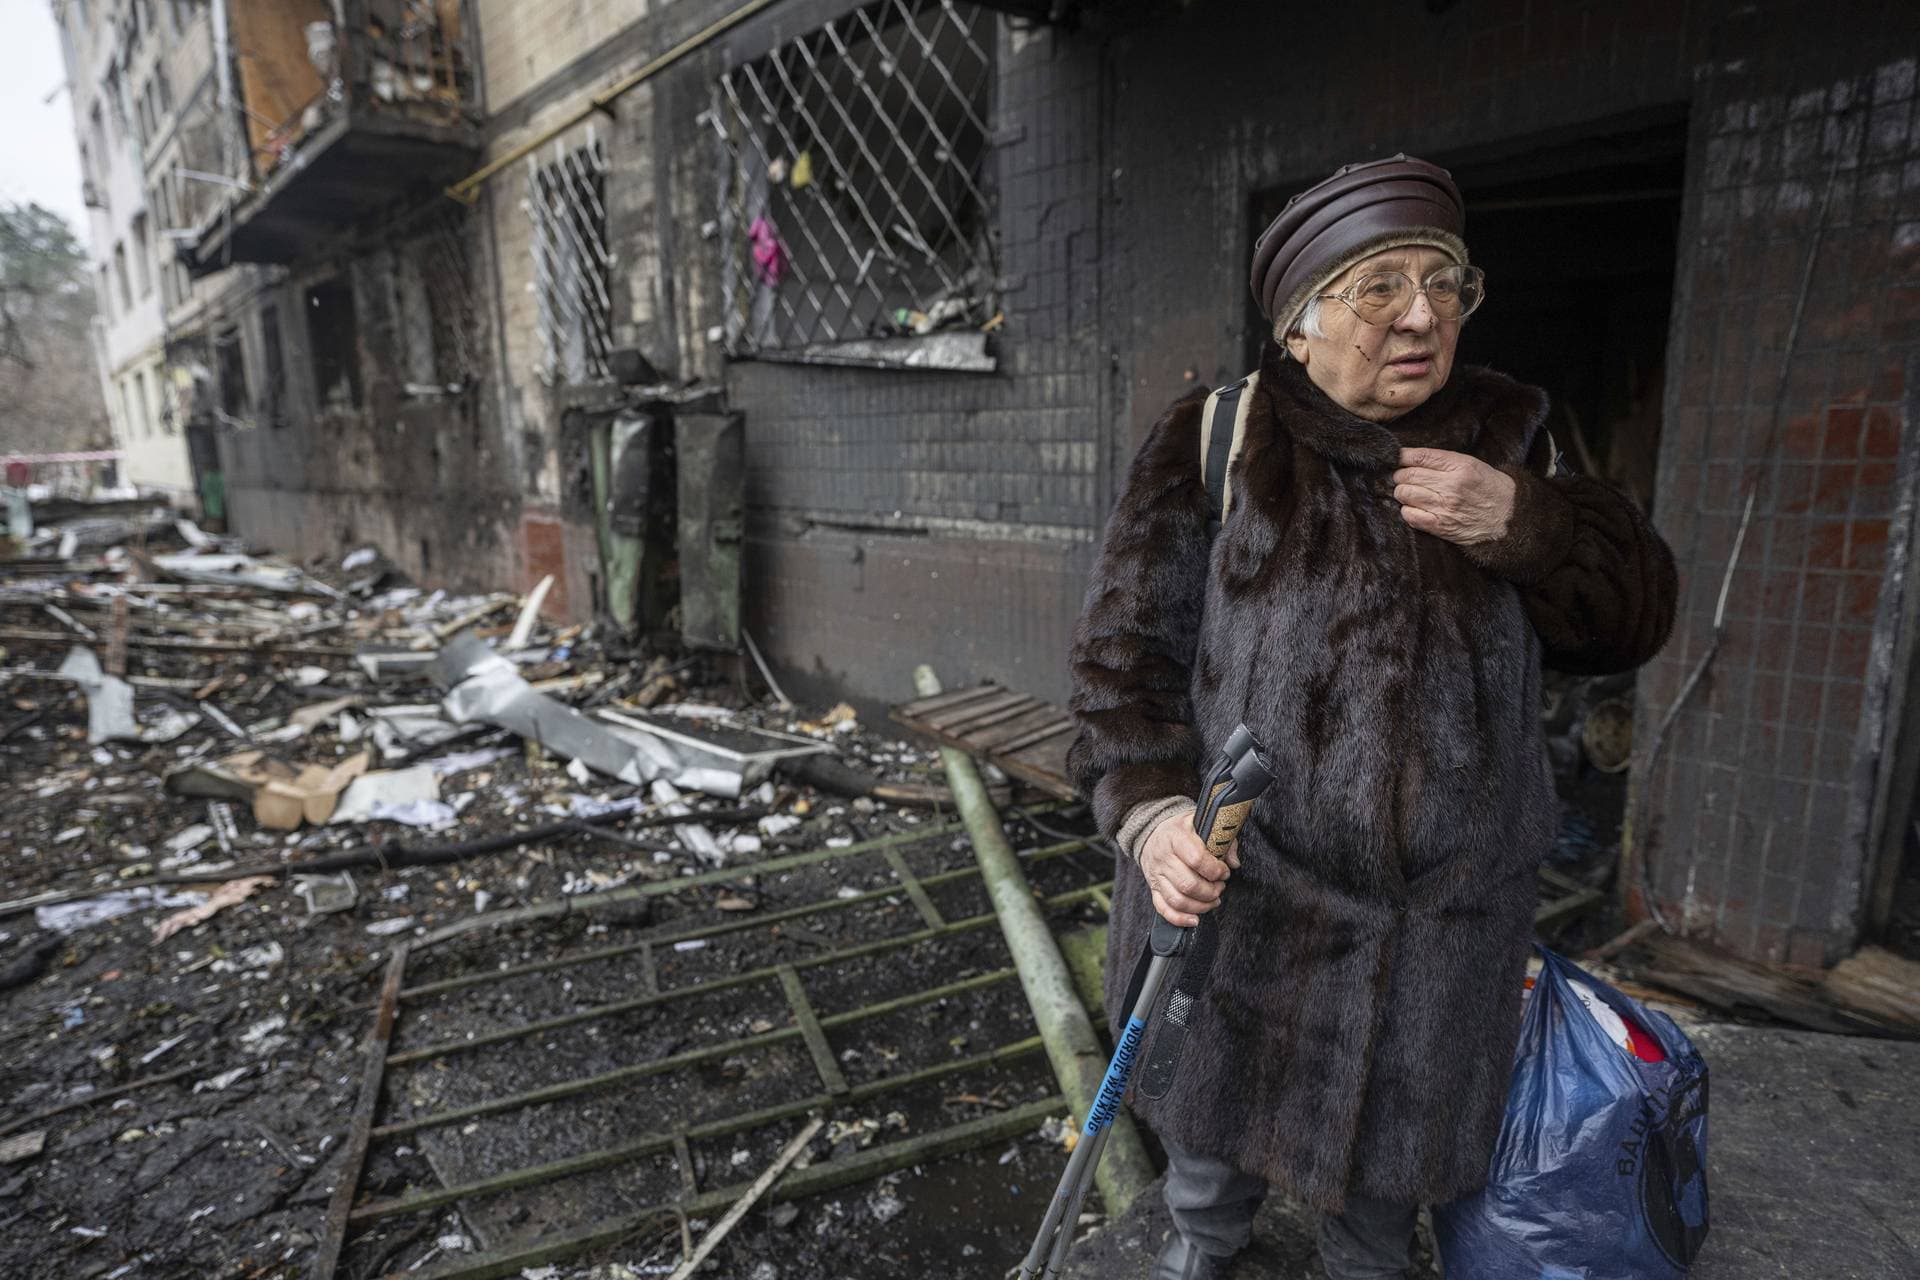 Svitlana Magdenko stands in front of her damaged house after a Russian rocket attack at a residential neighbourhood in Kyiv